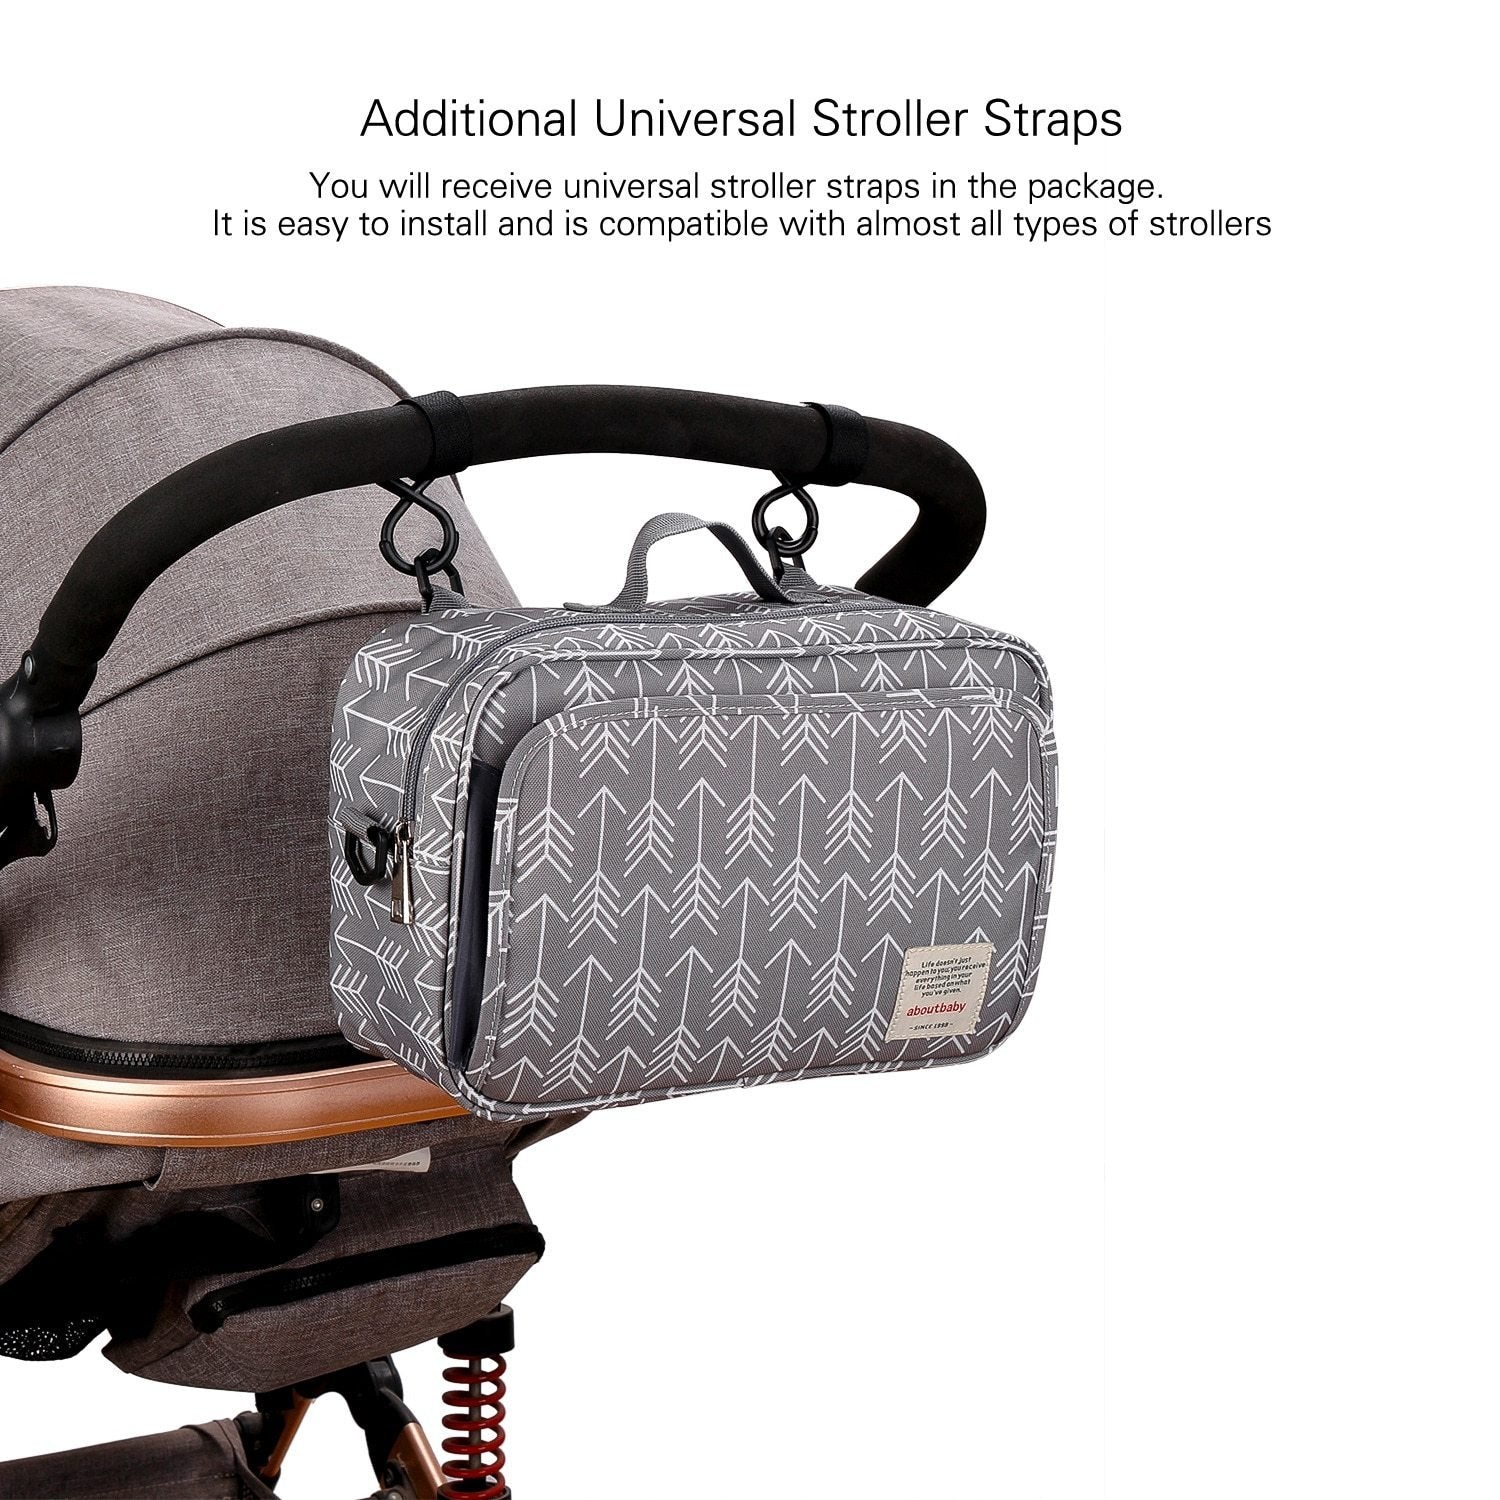 Baby Stroller Organizer Bag with Easy Access Baby Wipes Pocket, Shoulder Strap, mobile phone and personal items (Choice of 6 Styles) - Baby Mood Lamp